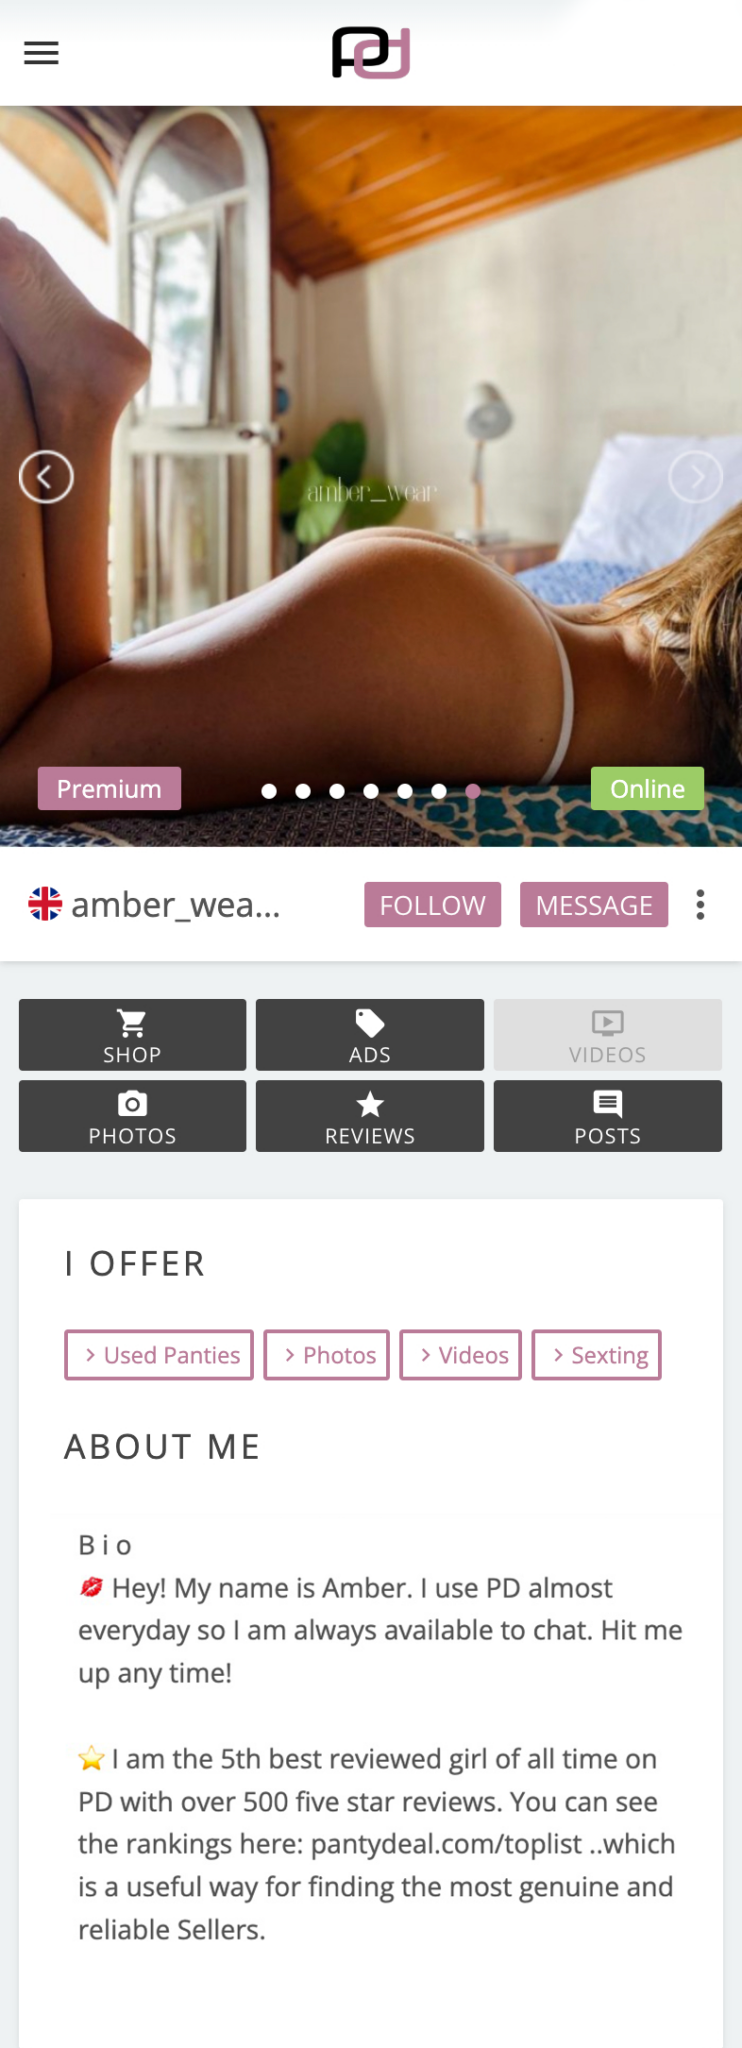 Amber_Wear's profile on Pantydeal, showing that she offers used panties, photos, videos, and sexting and that she if the 5th highest rated seller.